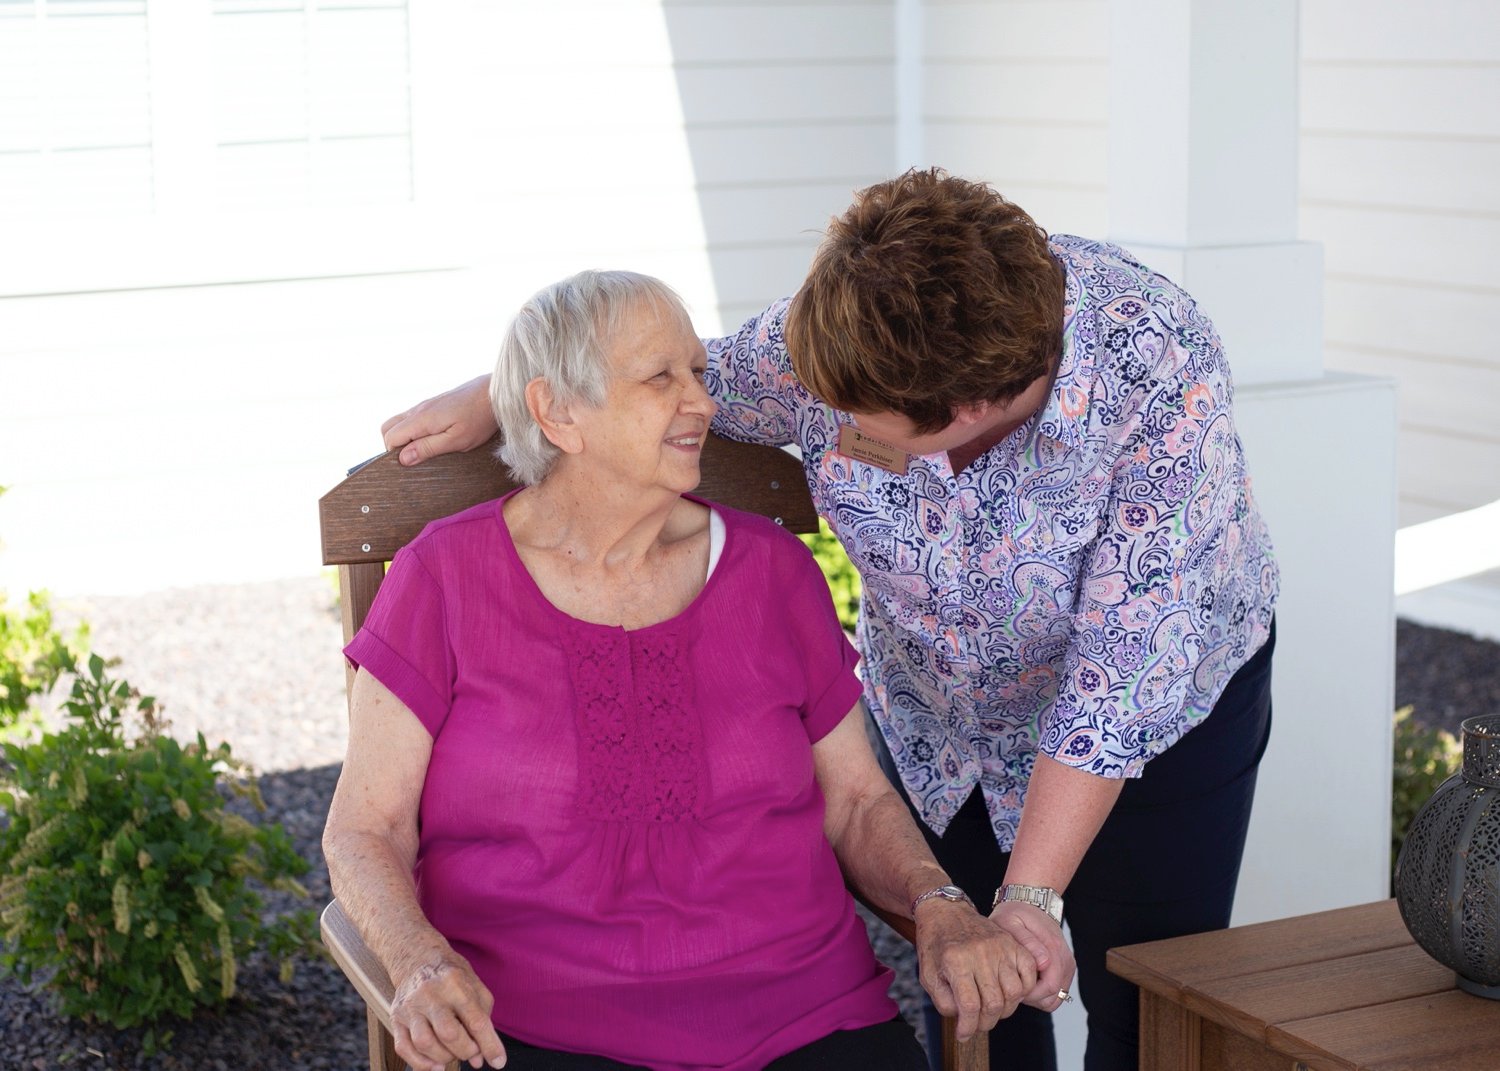 A staff member standing next to a senior resident on the patio